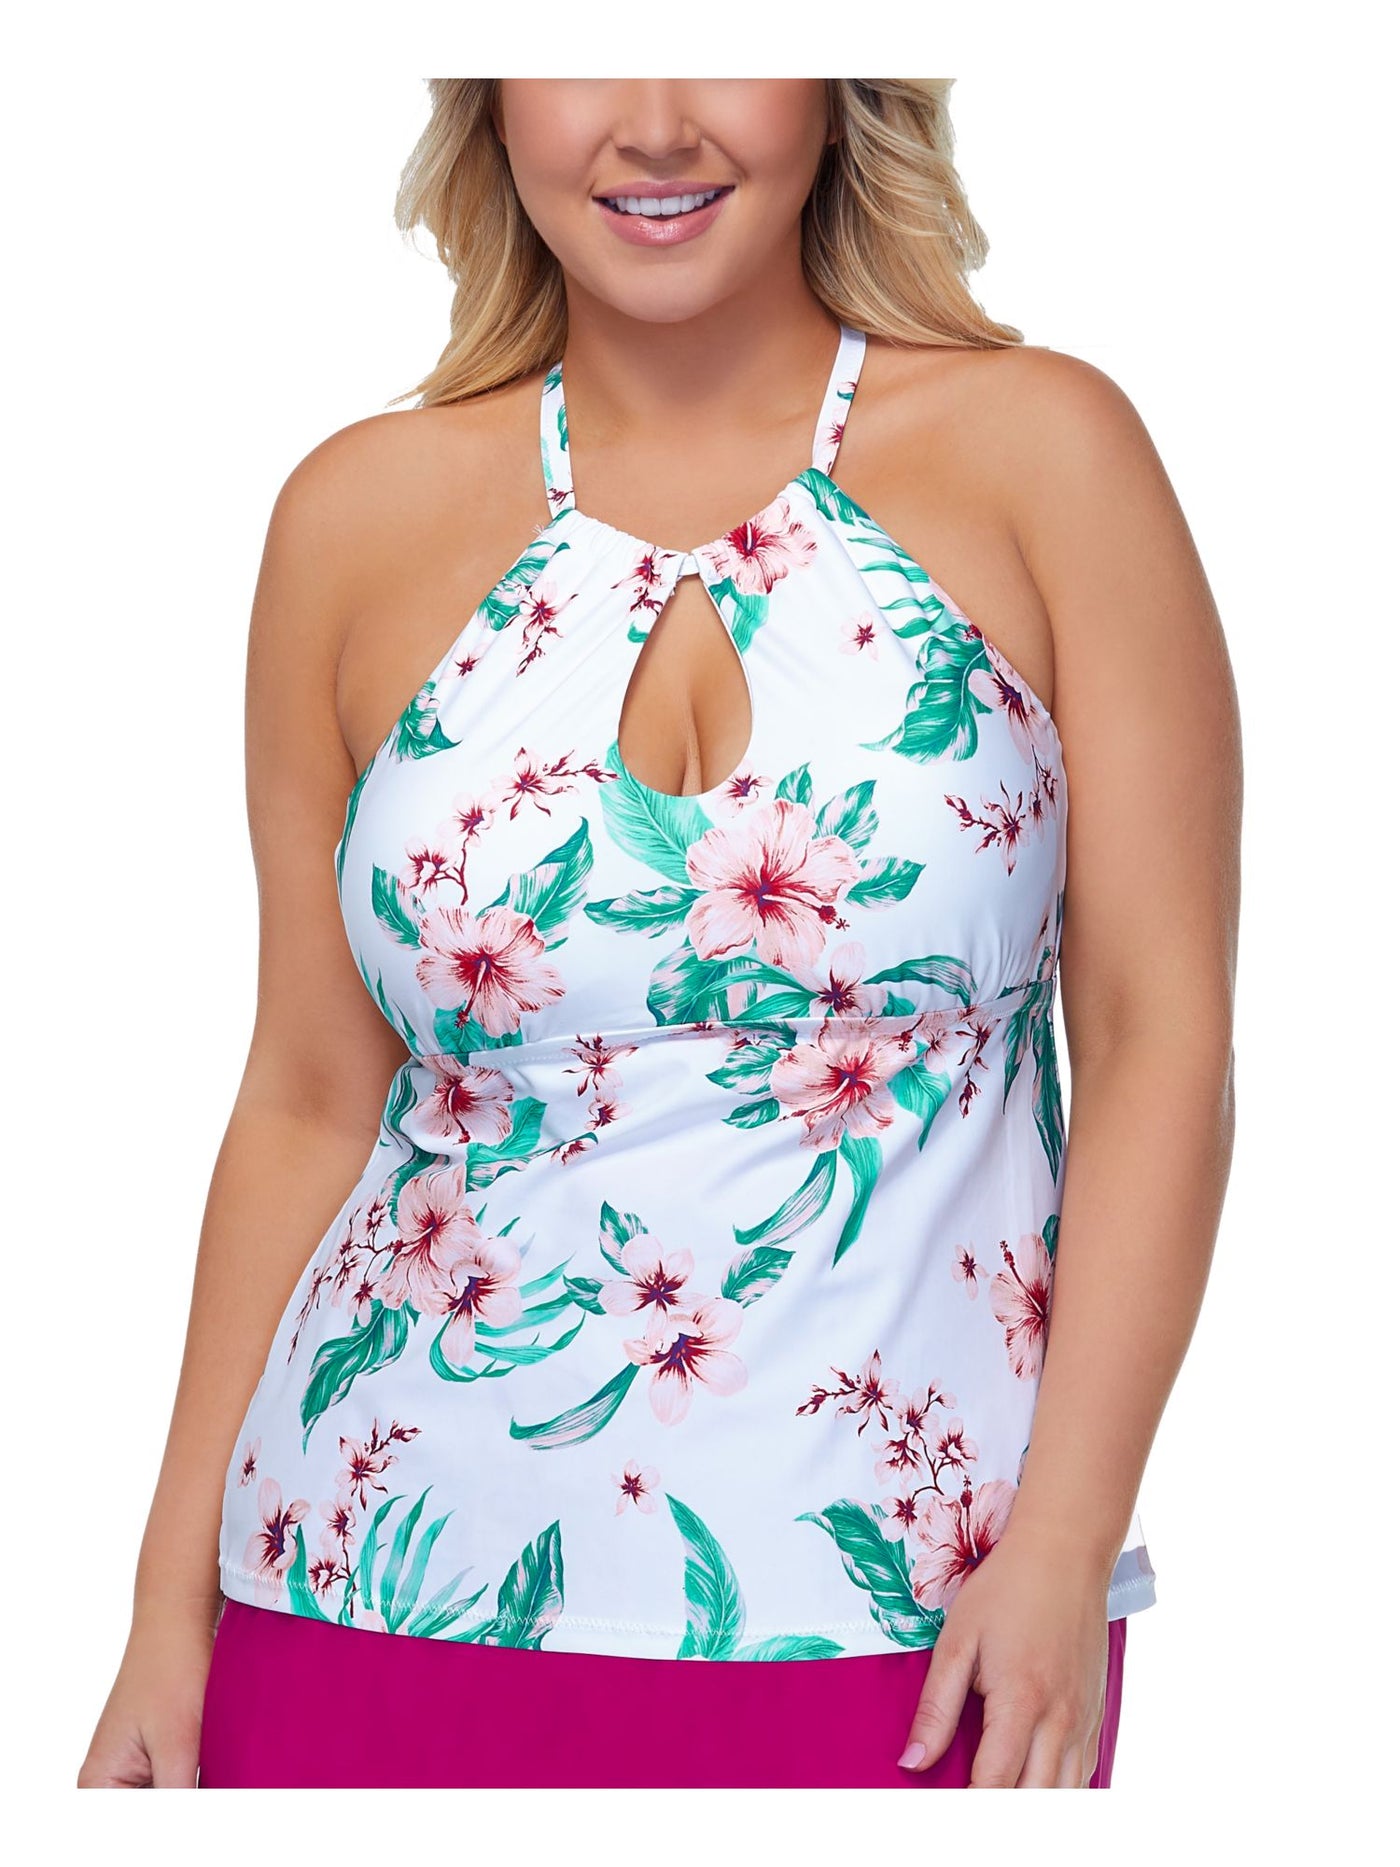 RAISINS CURVE Women's White Floral Underwire Removable Cups High Neck Tankini Swimsuit Top S